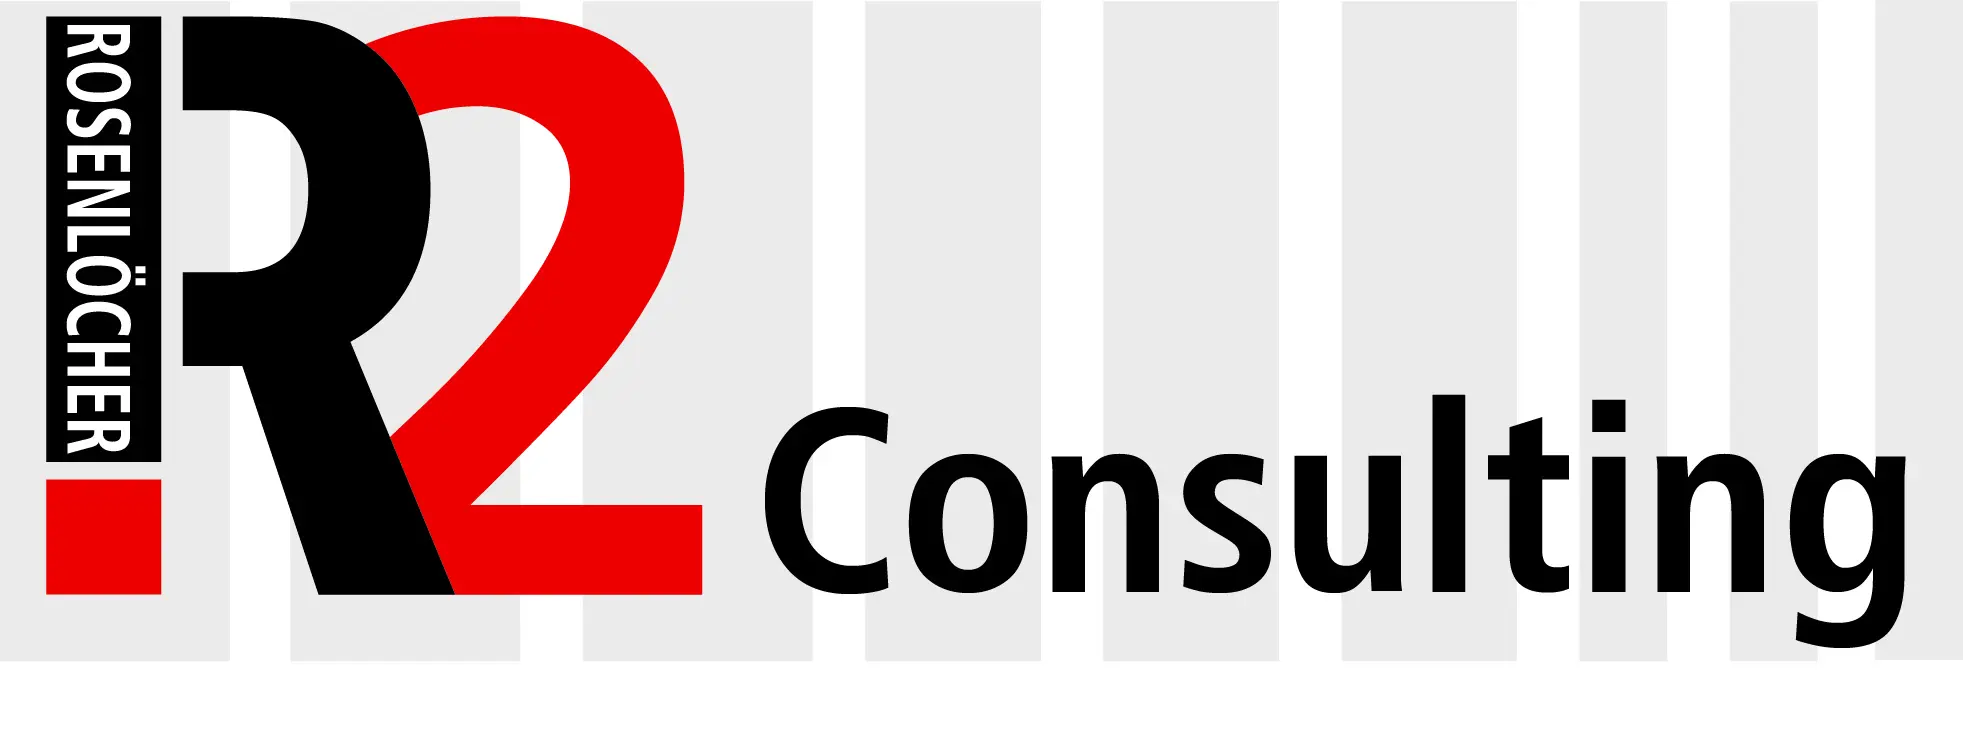 r2 consulting